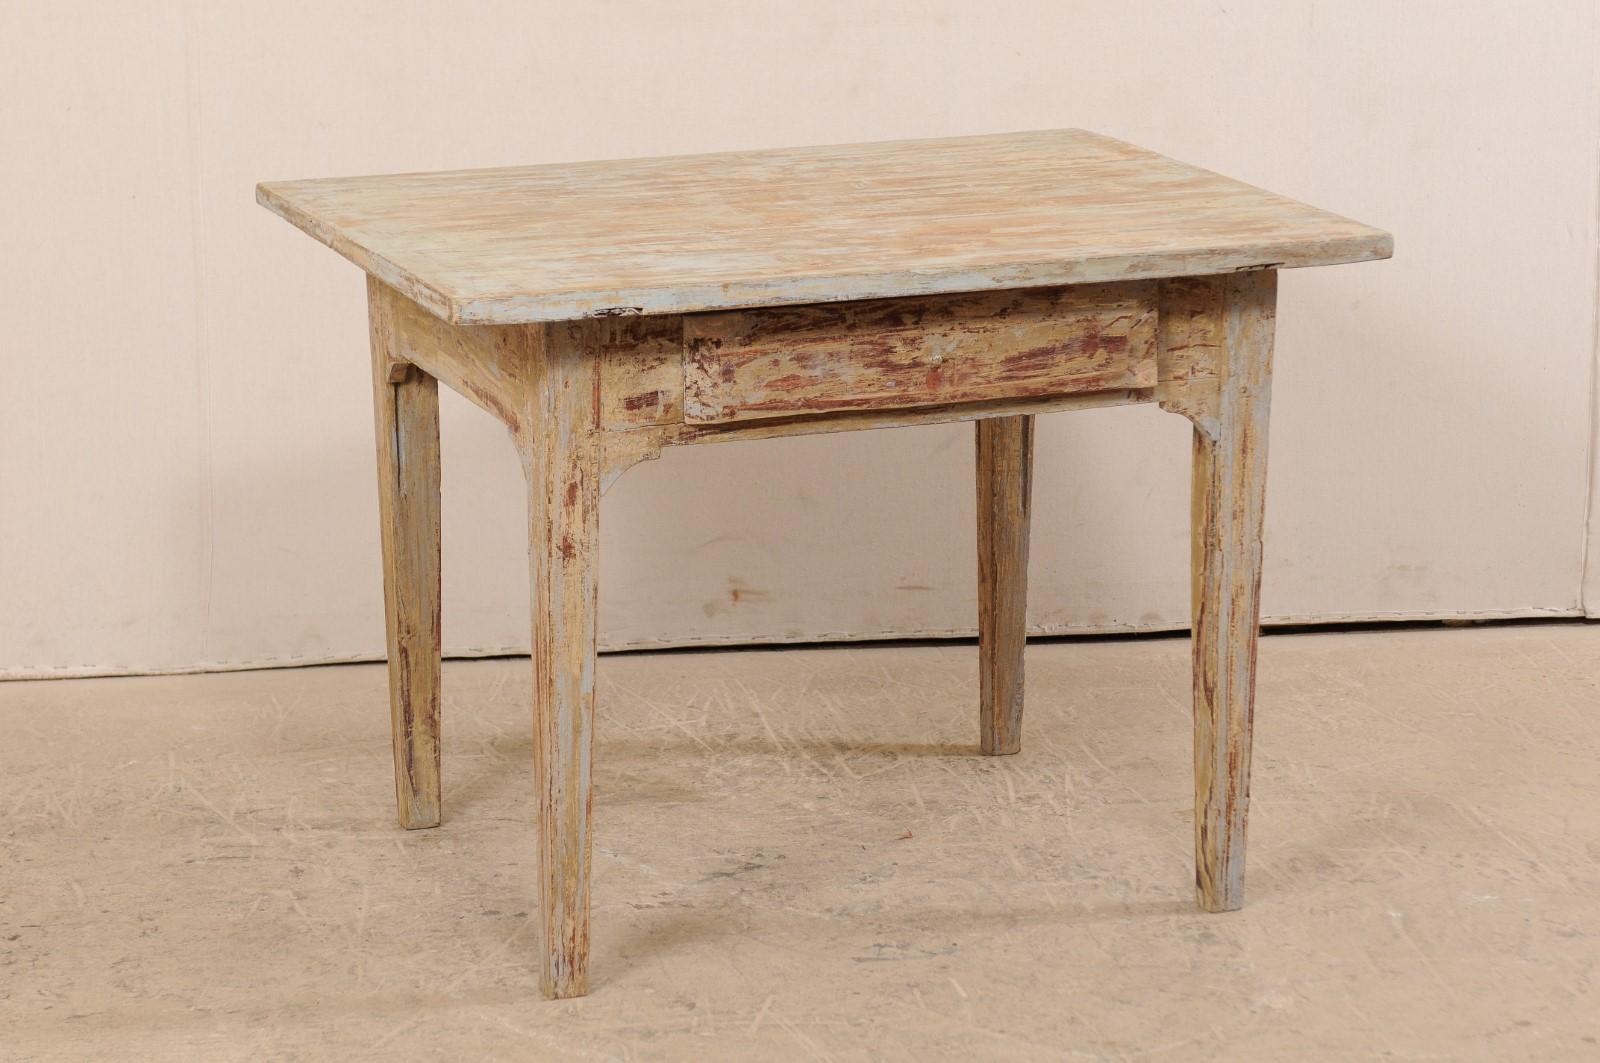 A Swedish Gustavian occasional table with single drawer from the 19th century. This antique table from Sweden is designed with simple, clean lines. It has an overhung top, resting above a plain apron with single drawer, and is raised upon four